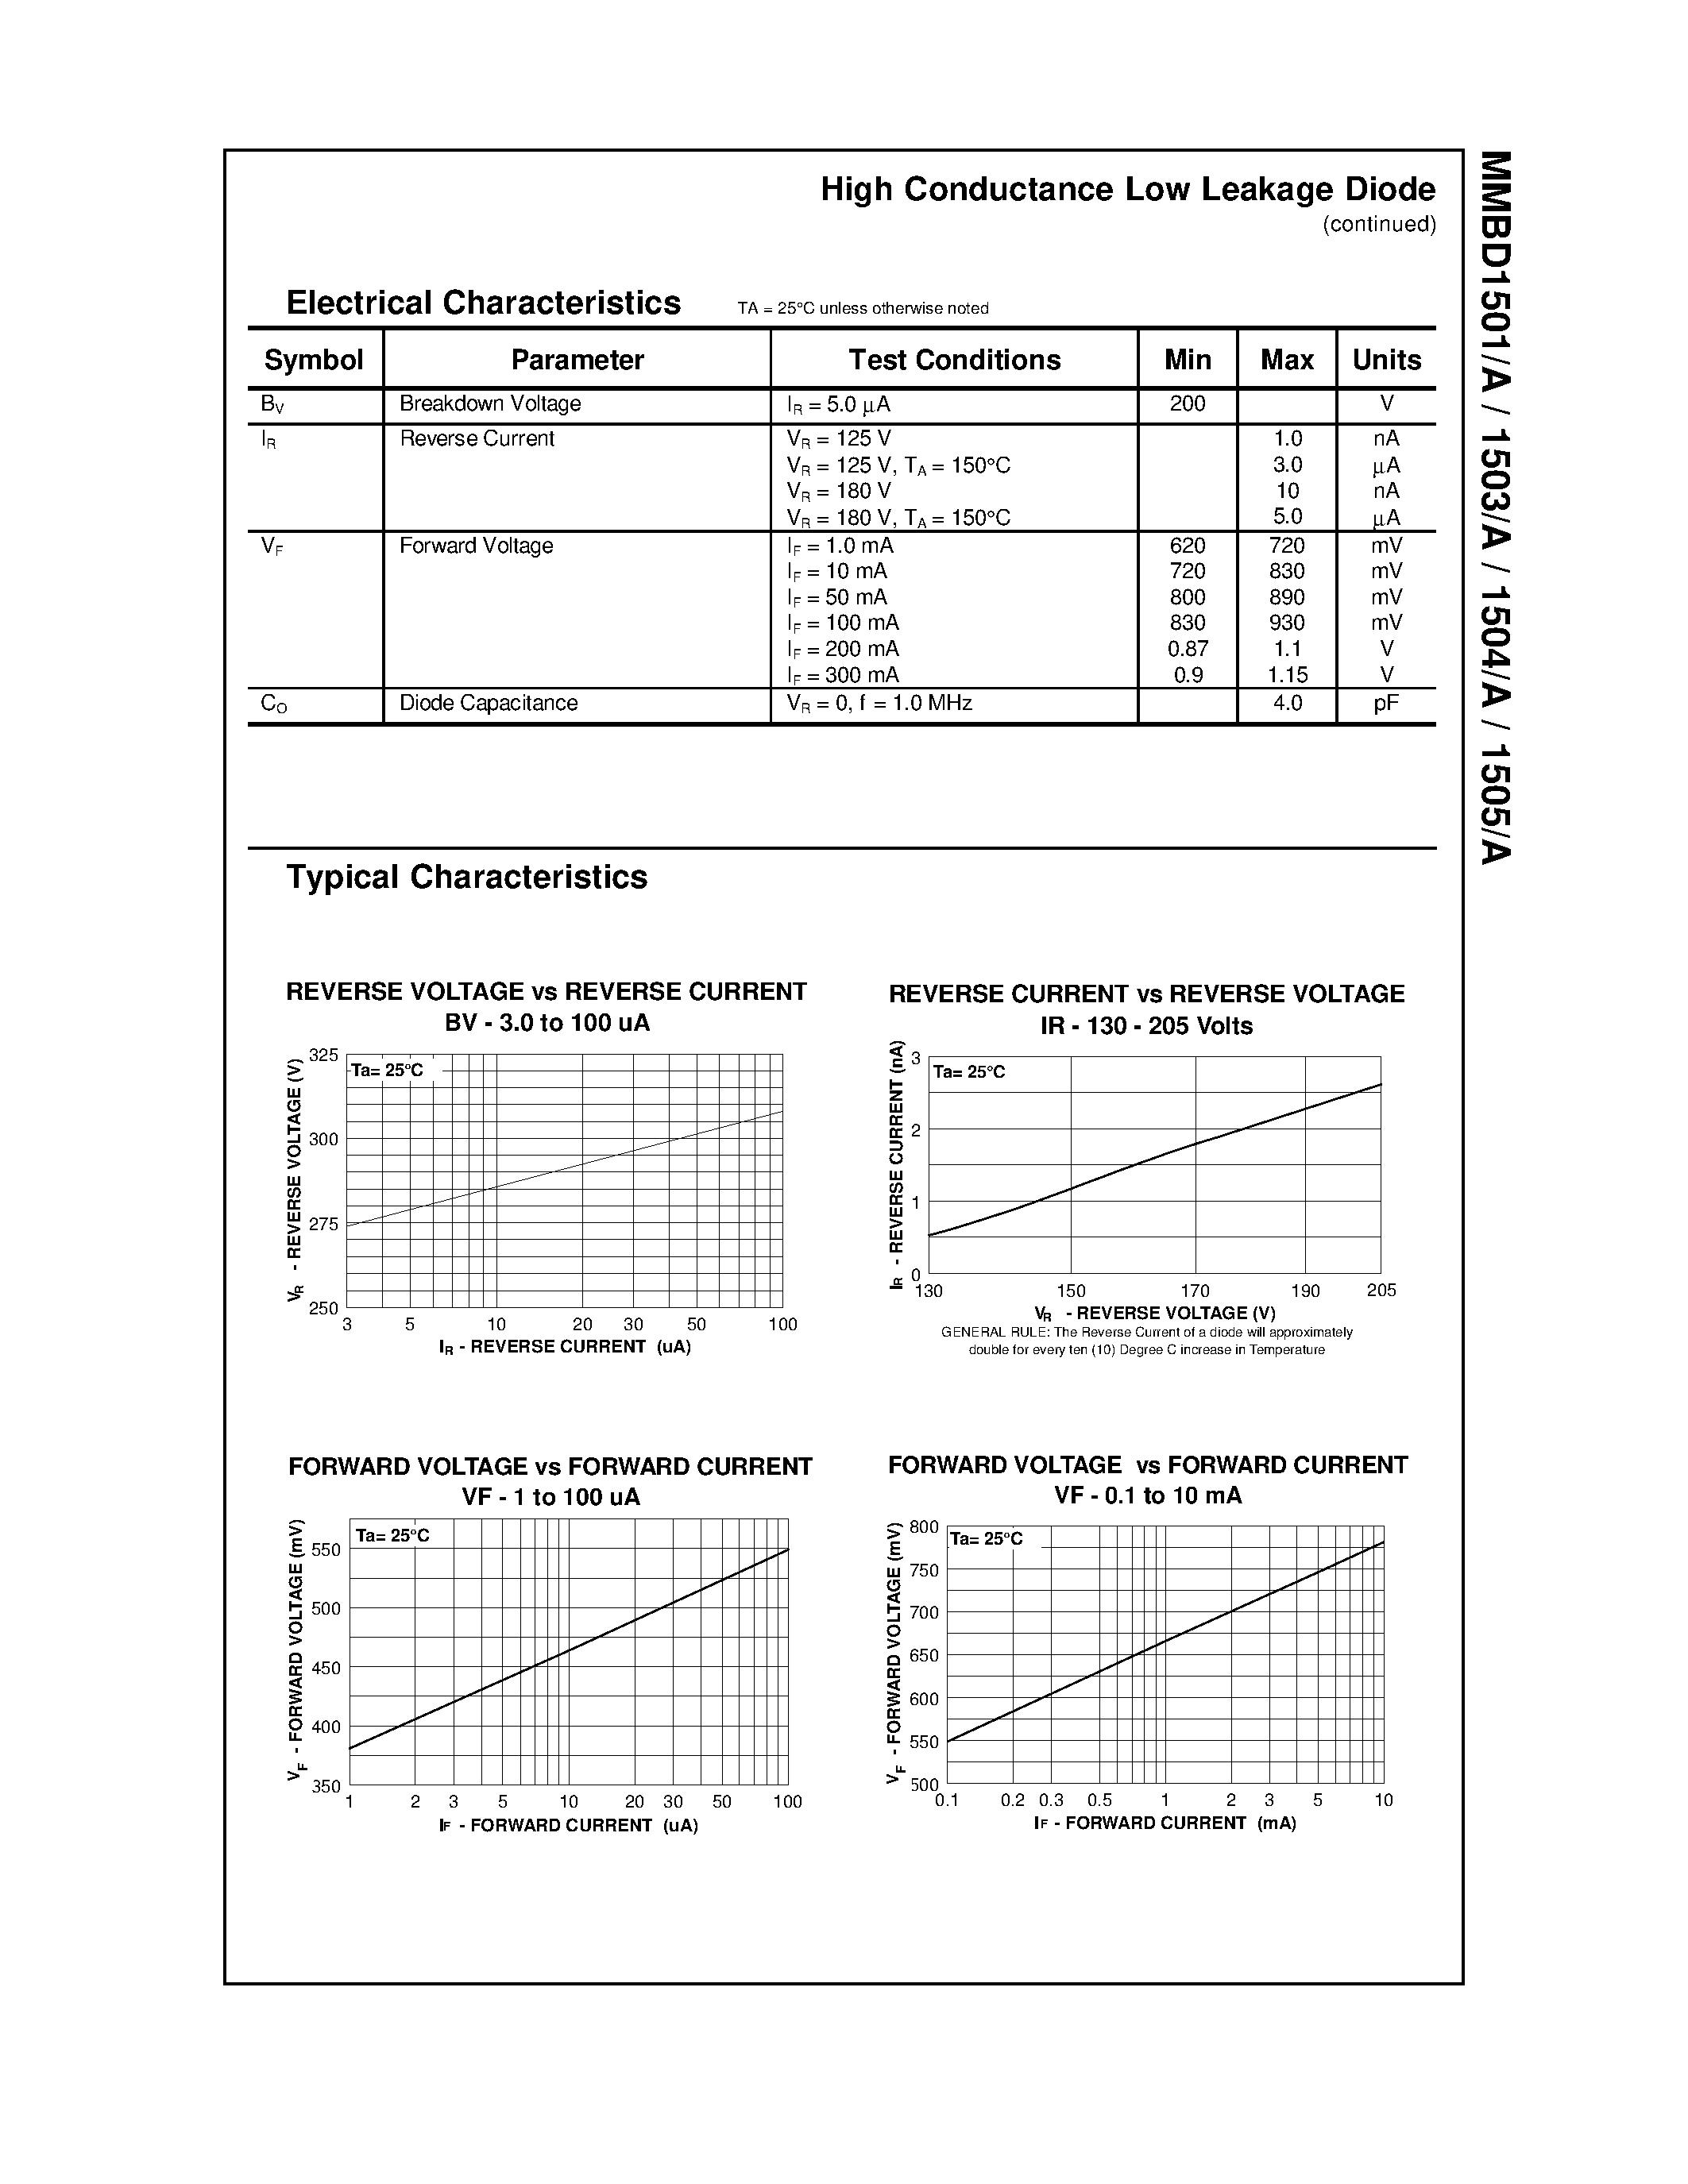 Datasheet MMBD1504 - High Conductance Low Leakage Diode page 2